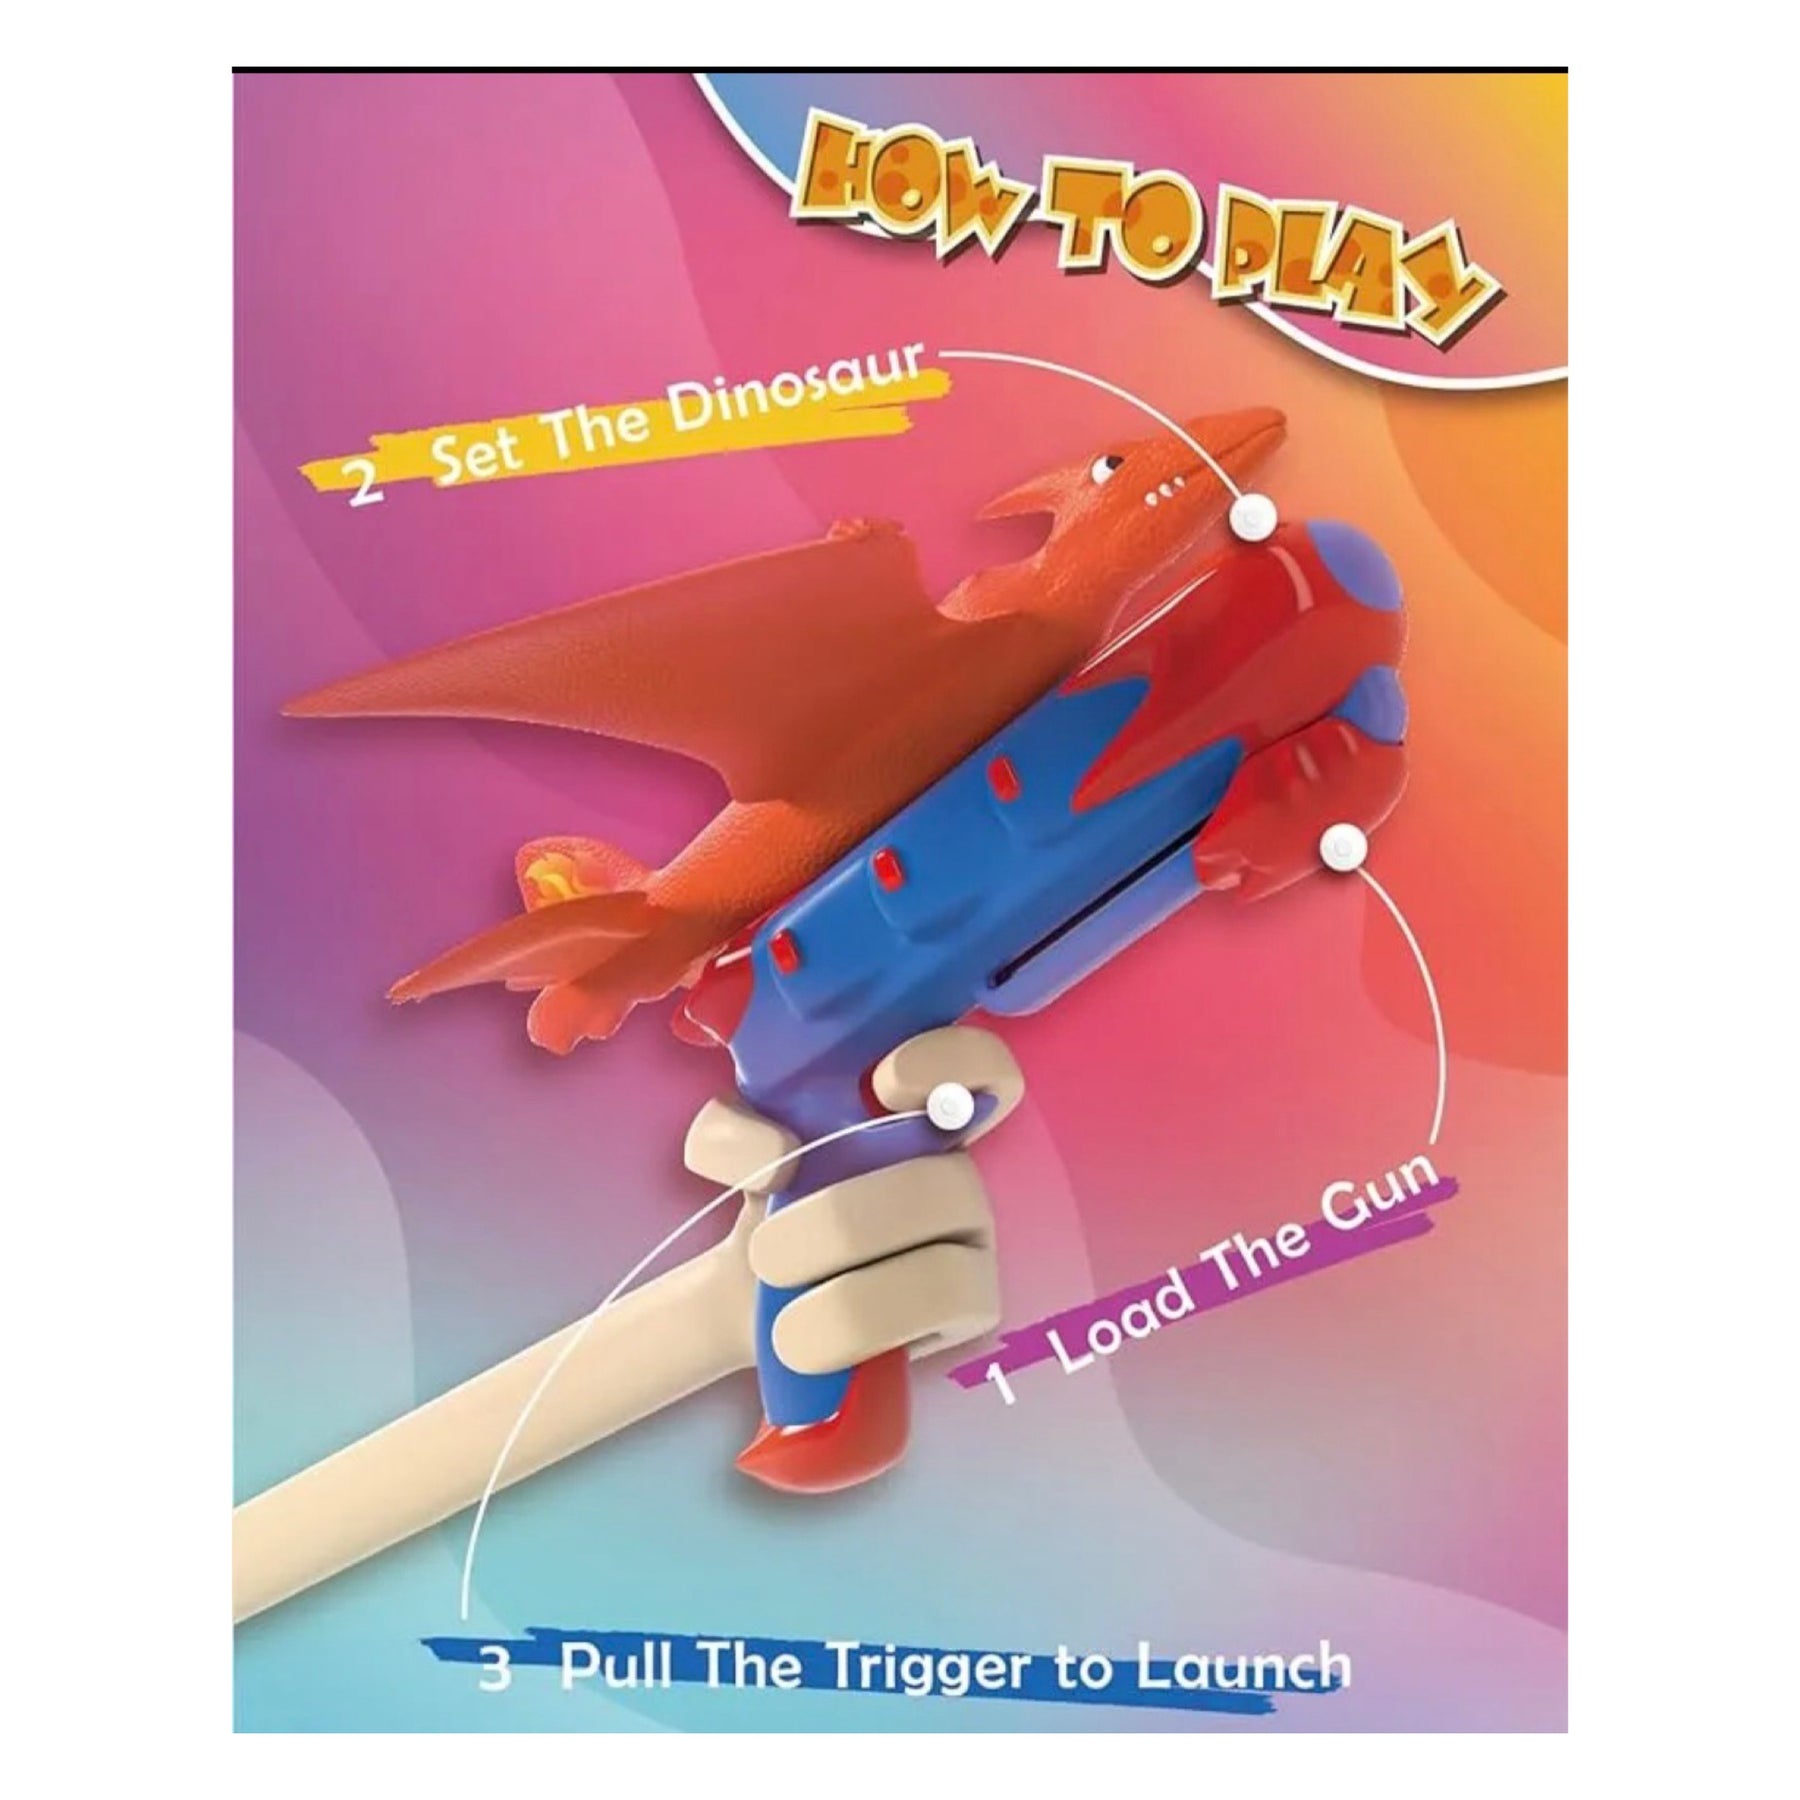 Foam Dinosaurs Launching Toy - Includes 3 Dinosaurs, Soars Up To 40ft!